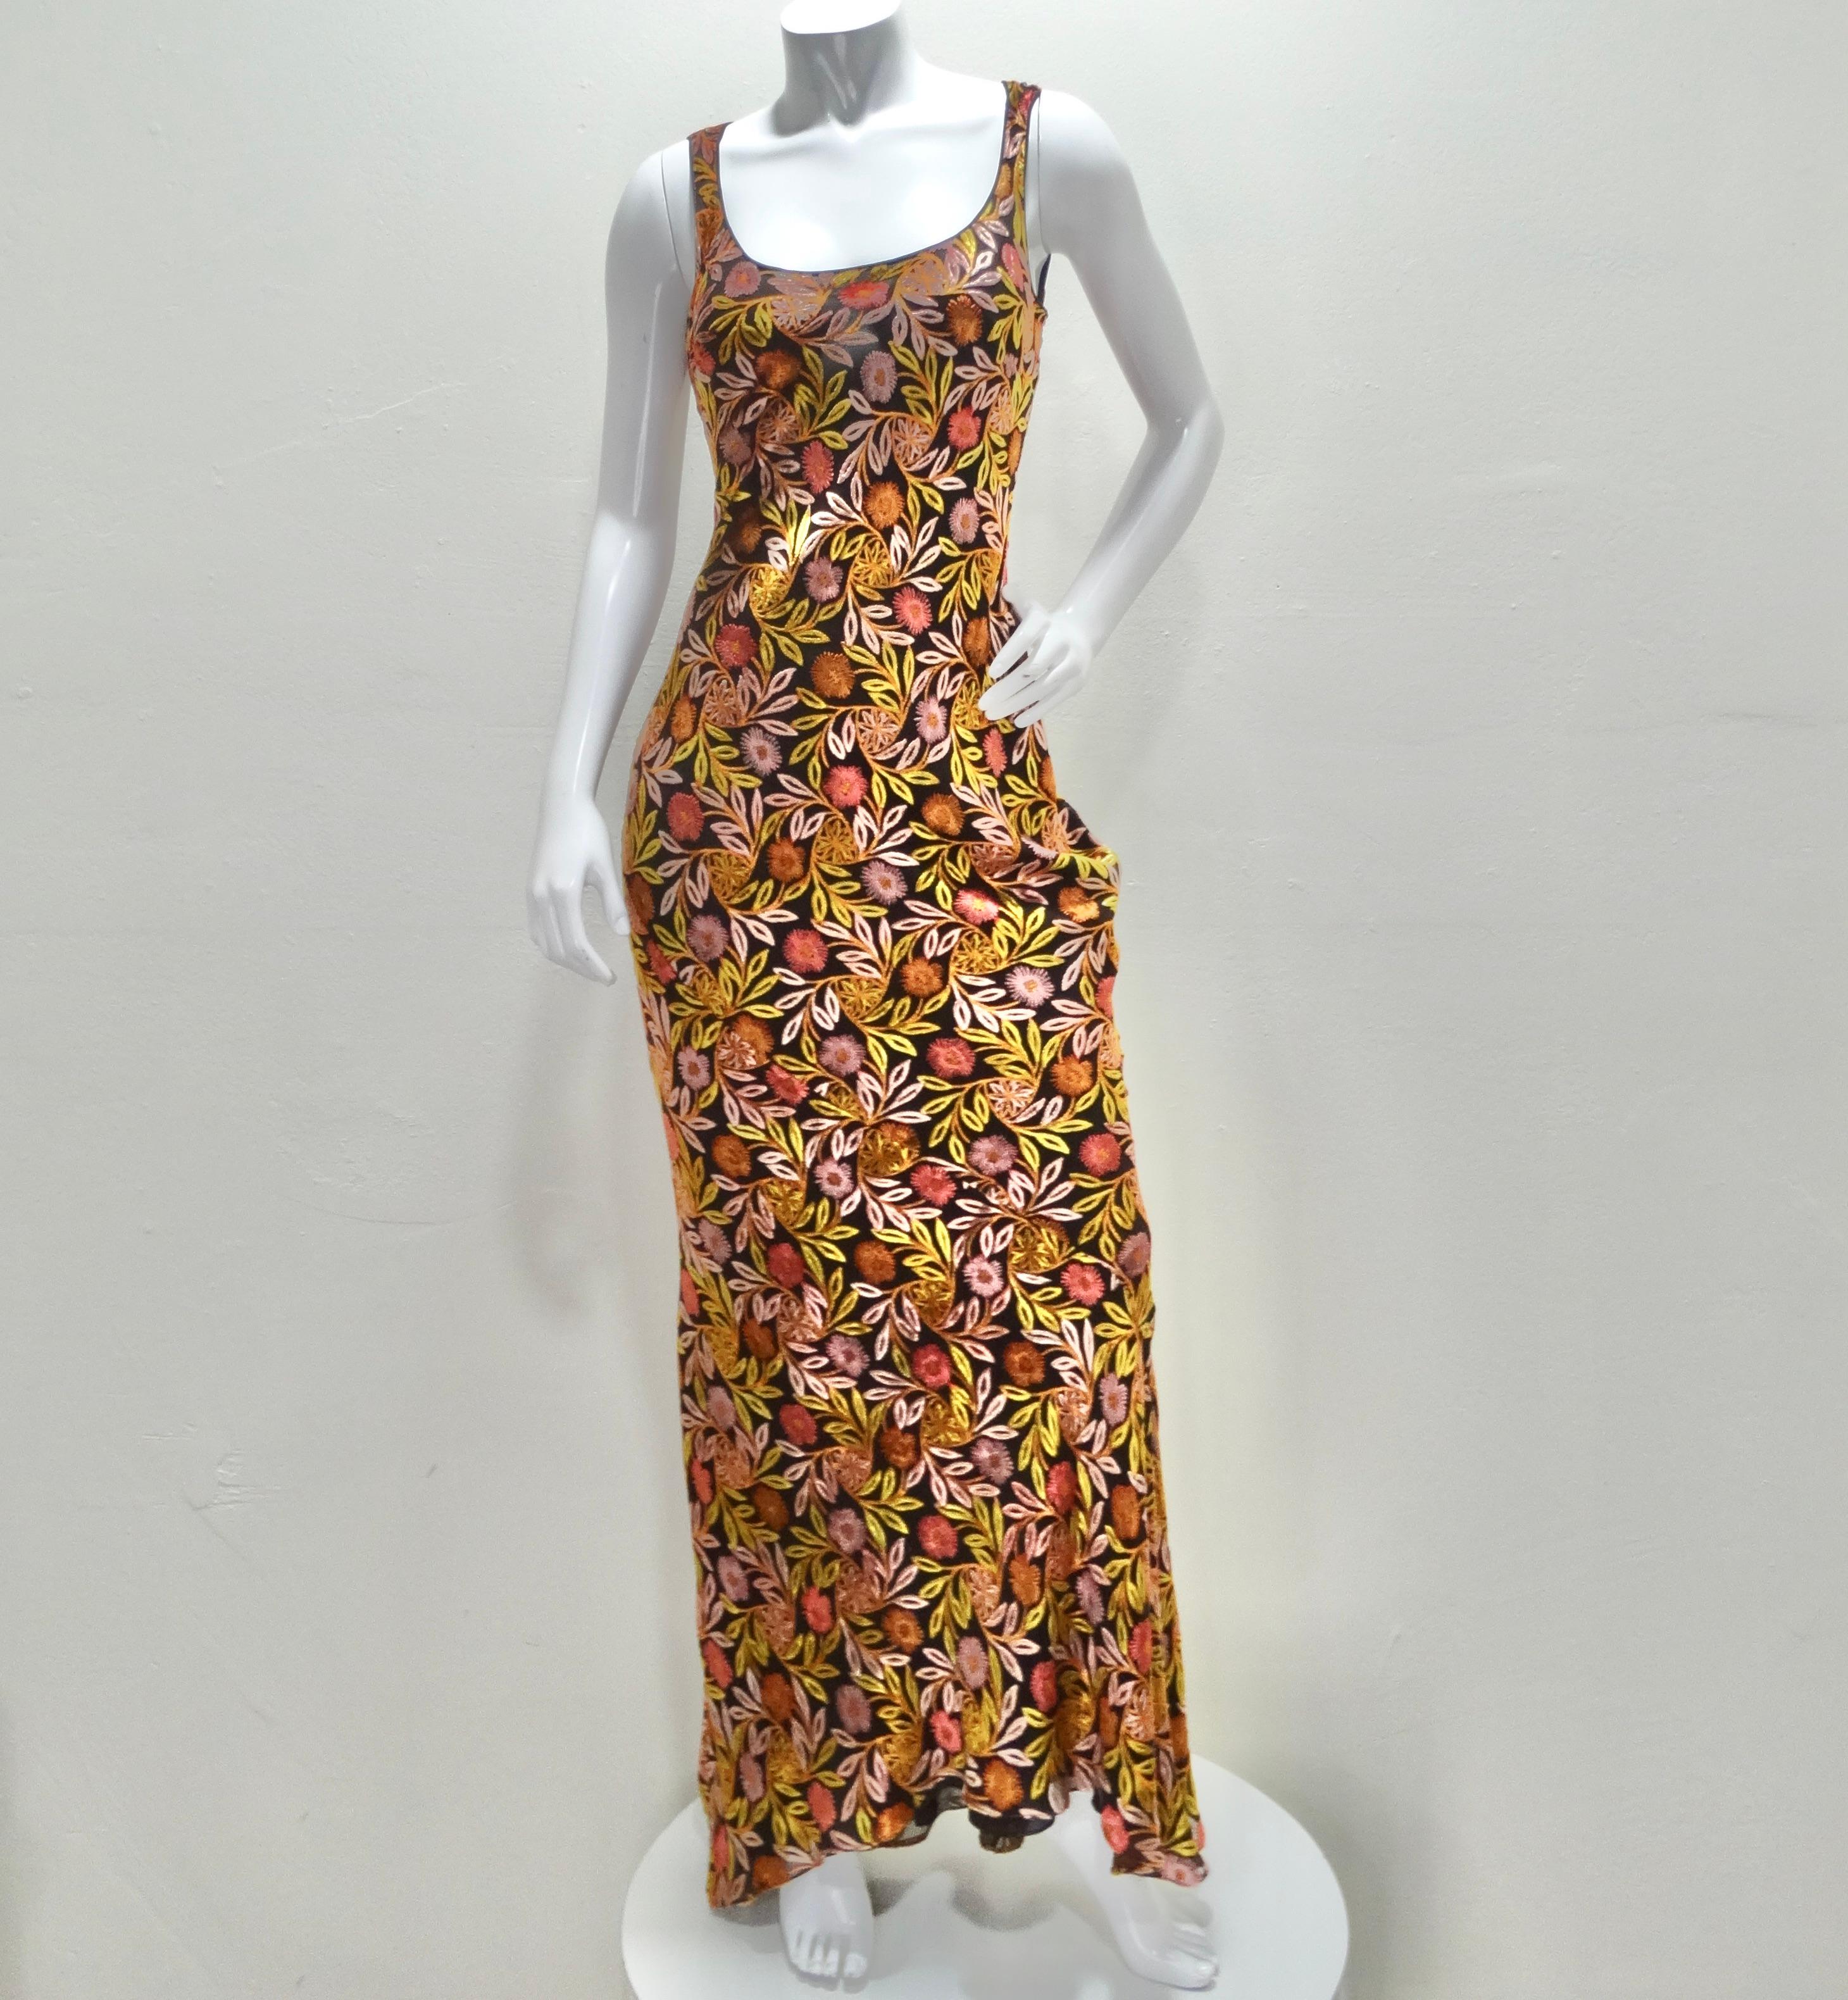 Rare John Galliano Floral Maxi Dress In Excellent Condition For Sale In Scottsdale, AZ